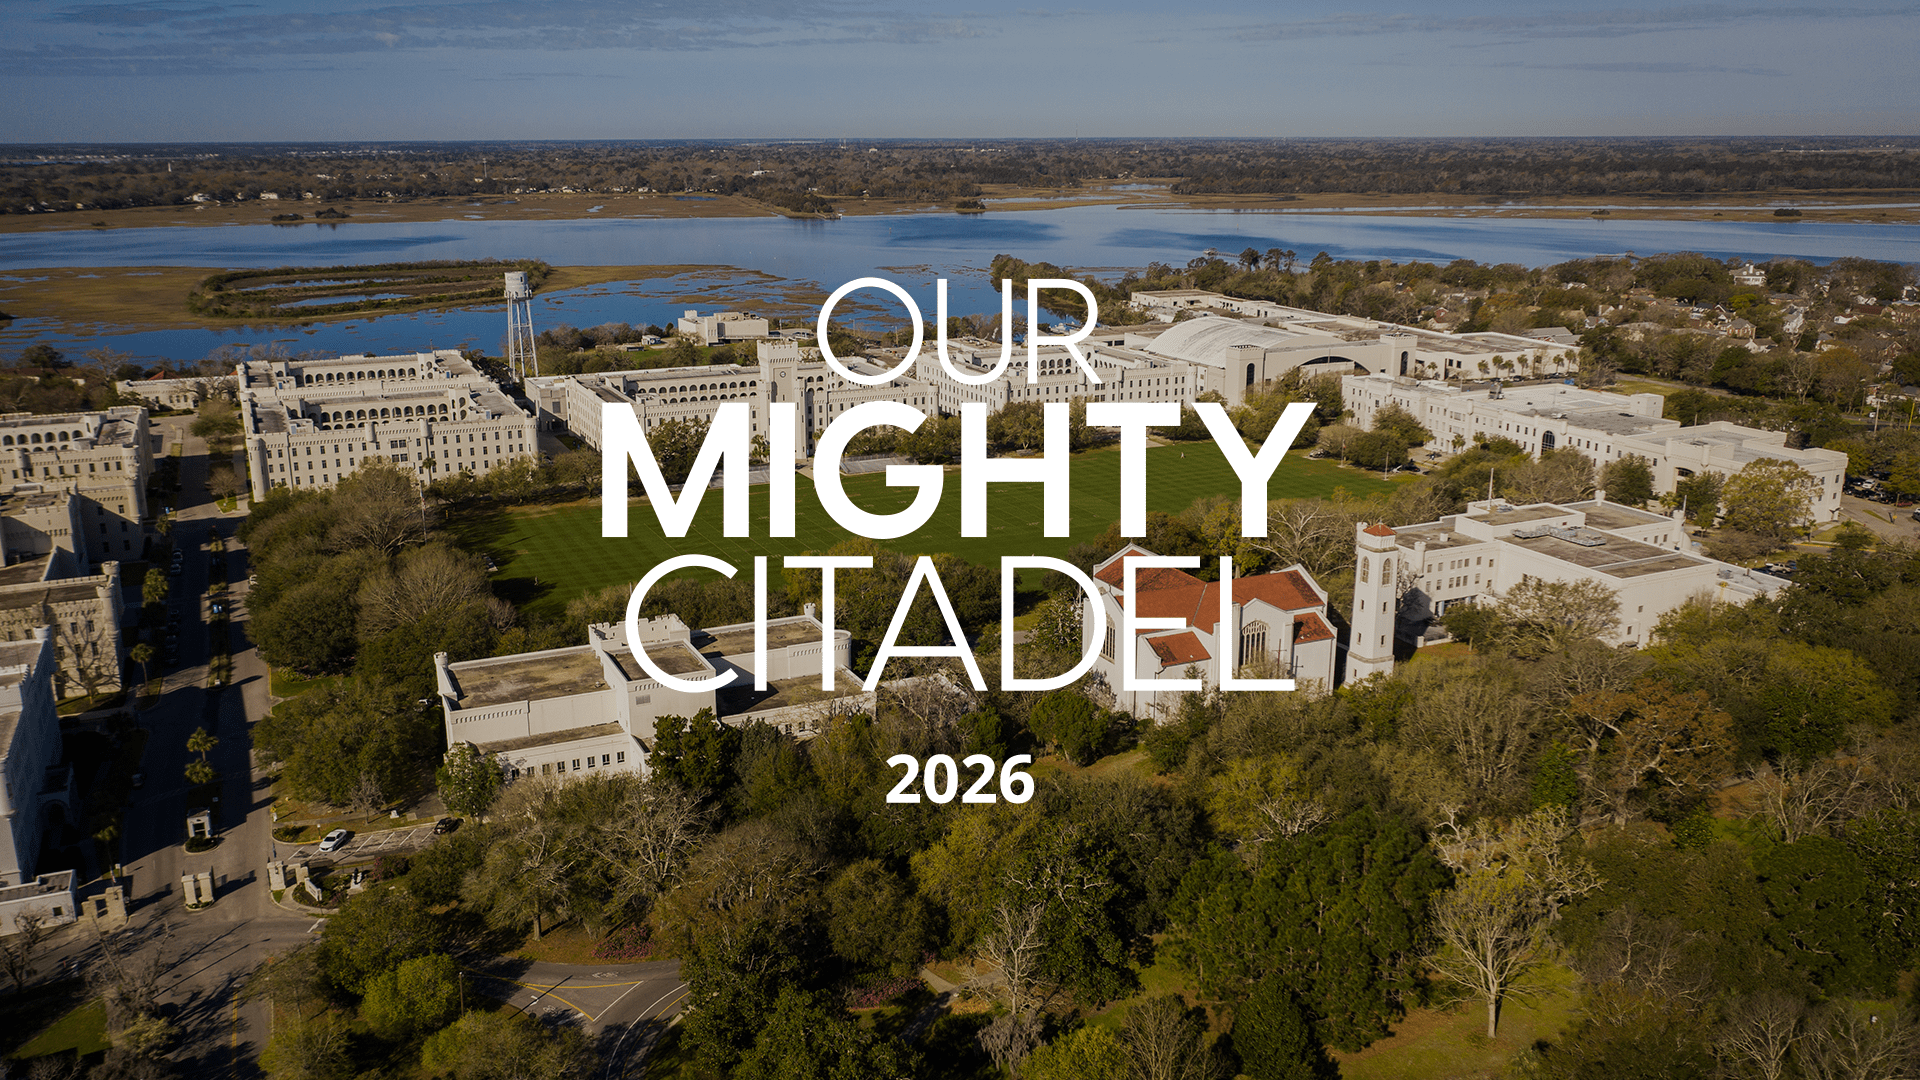 our-mighty-citadel-2026-advancing-our-legacy-of-leadership-the